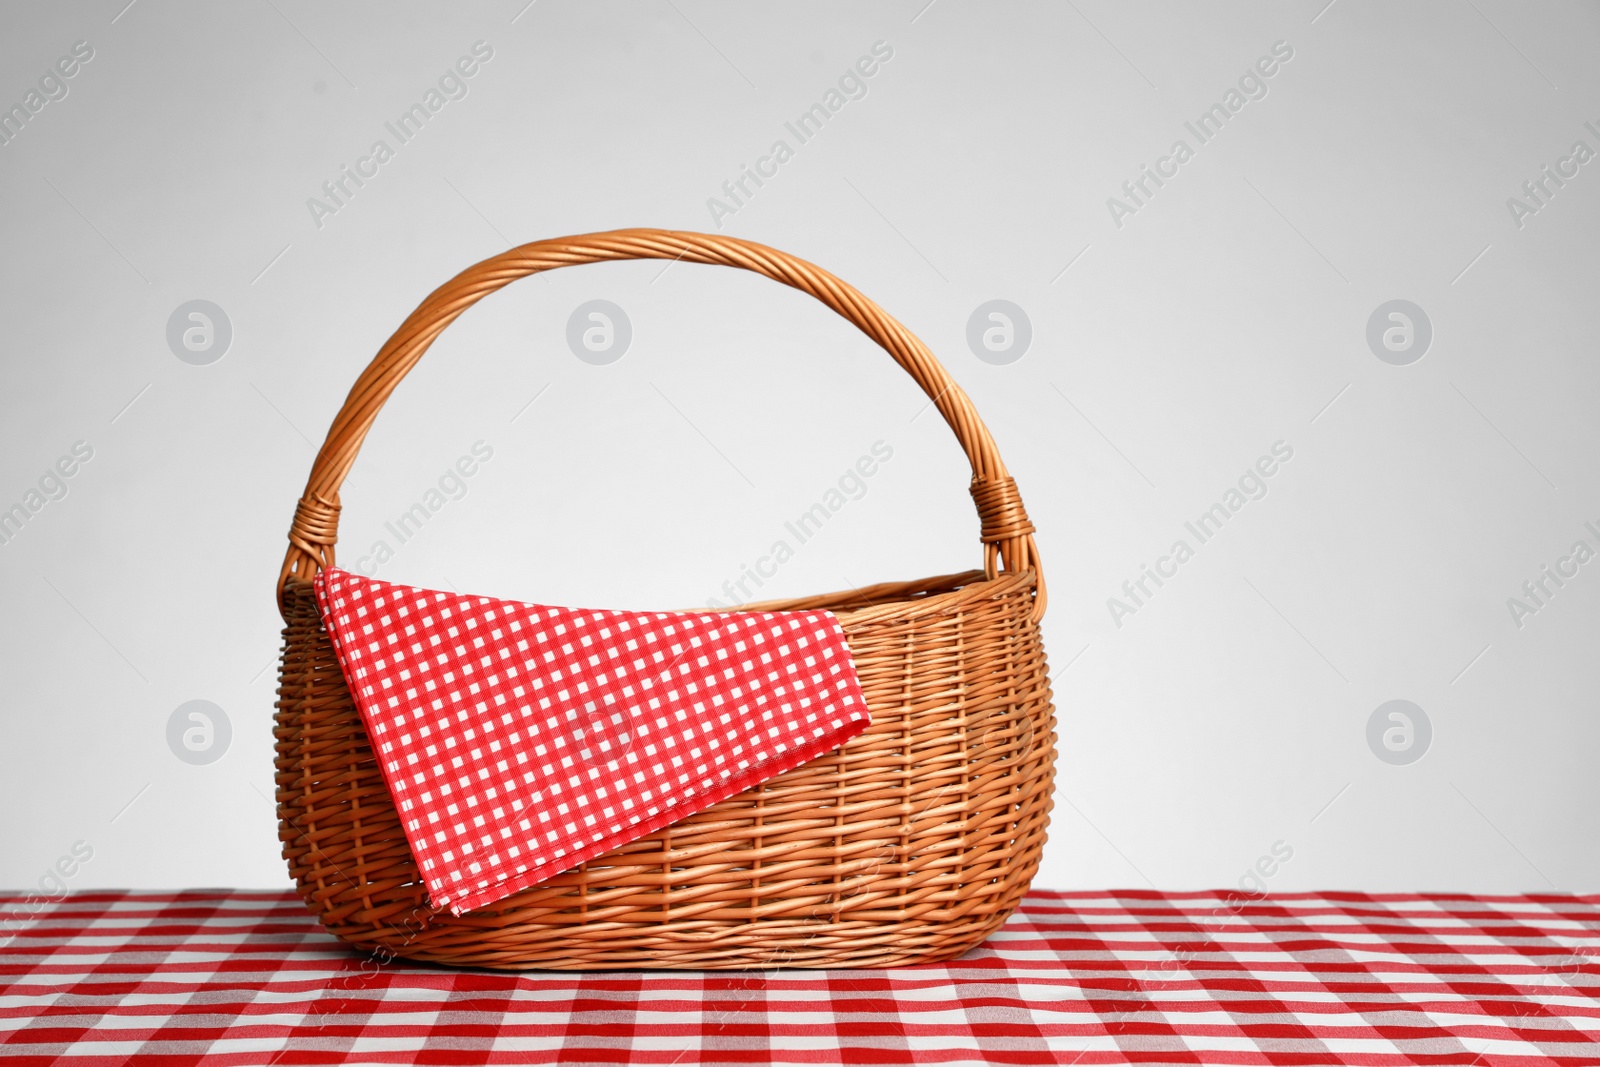 Photo of Wicker picnic basket with napkin on checkered tablecloth against white background